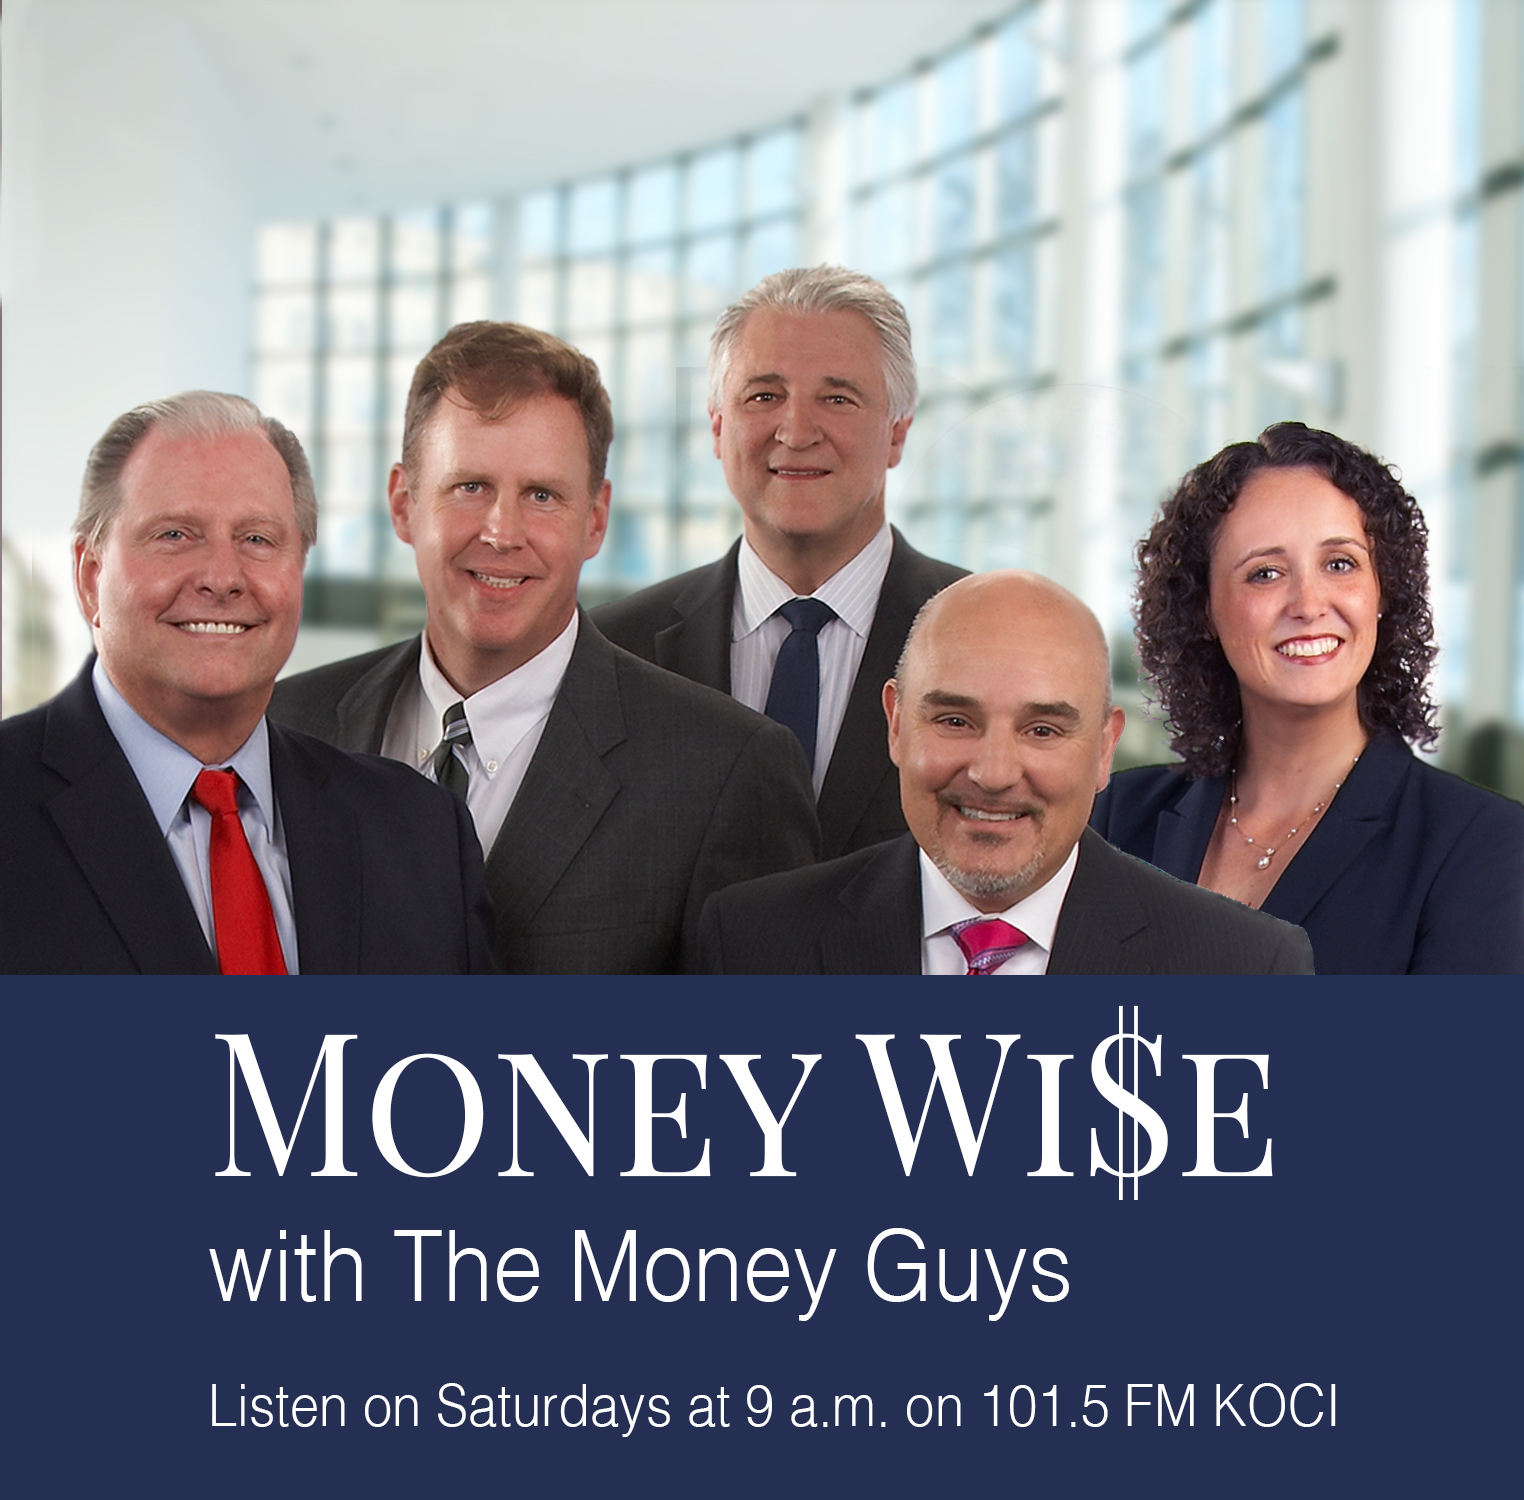 Money Wise Opening Show!